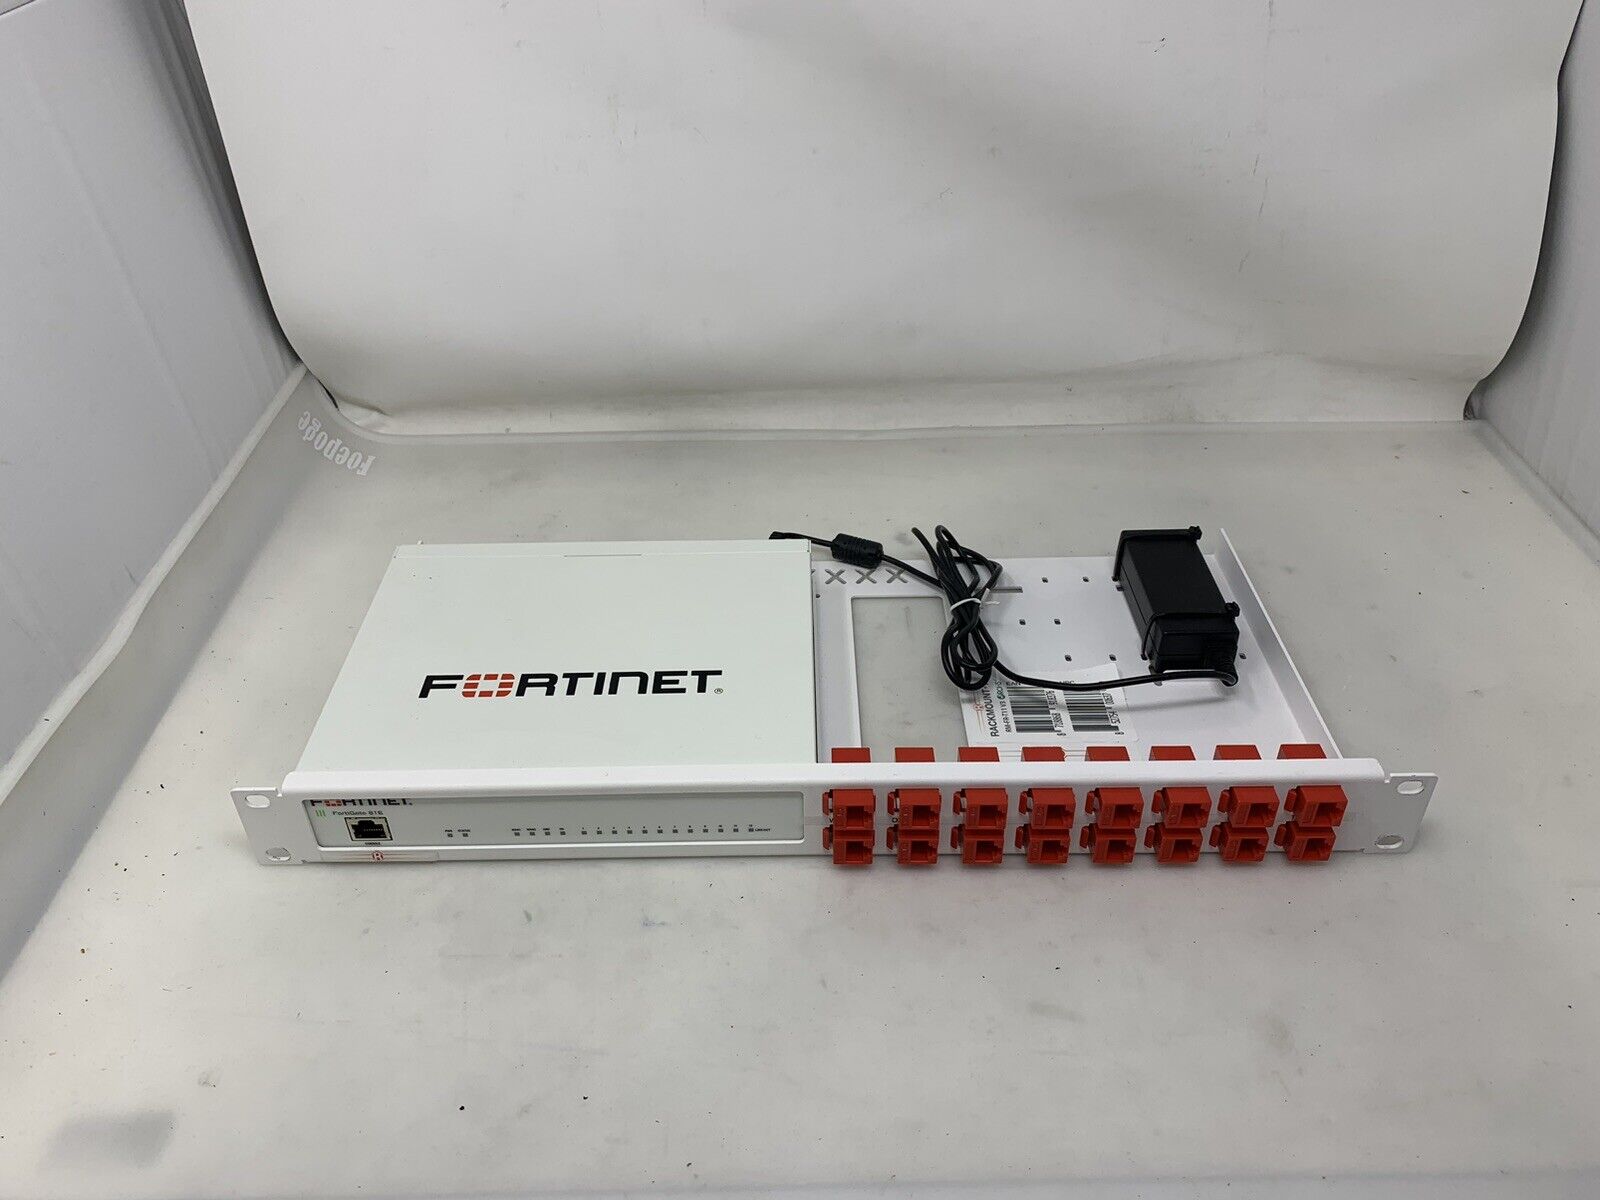 Fortinet FG-81E Network Security Firewall LAN Port Switch w/AC Adapter 32824F13